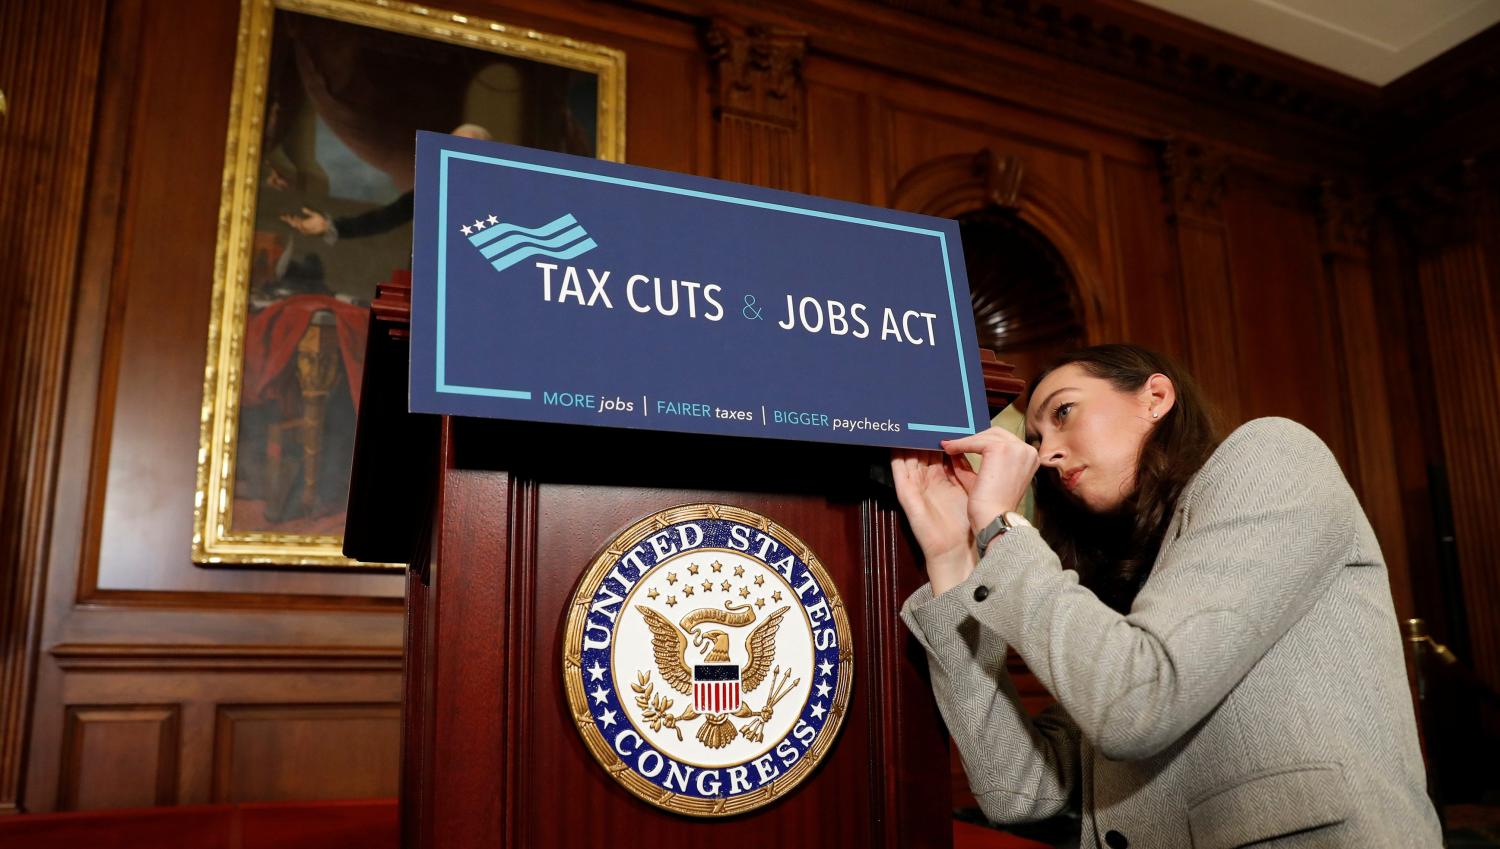 An aide adjusts a sign prior to a news conference announcing the passage of the "Tax Cuts and Jobs Act."